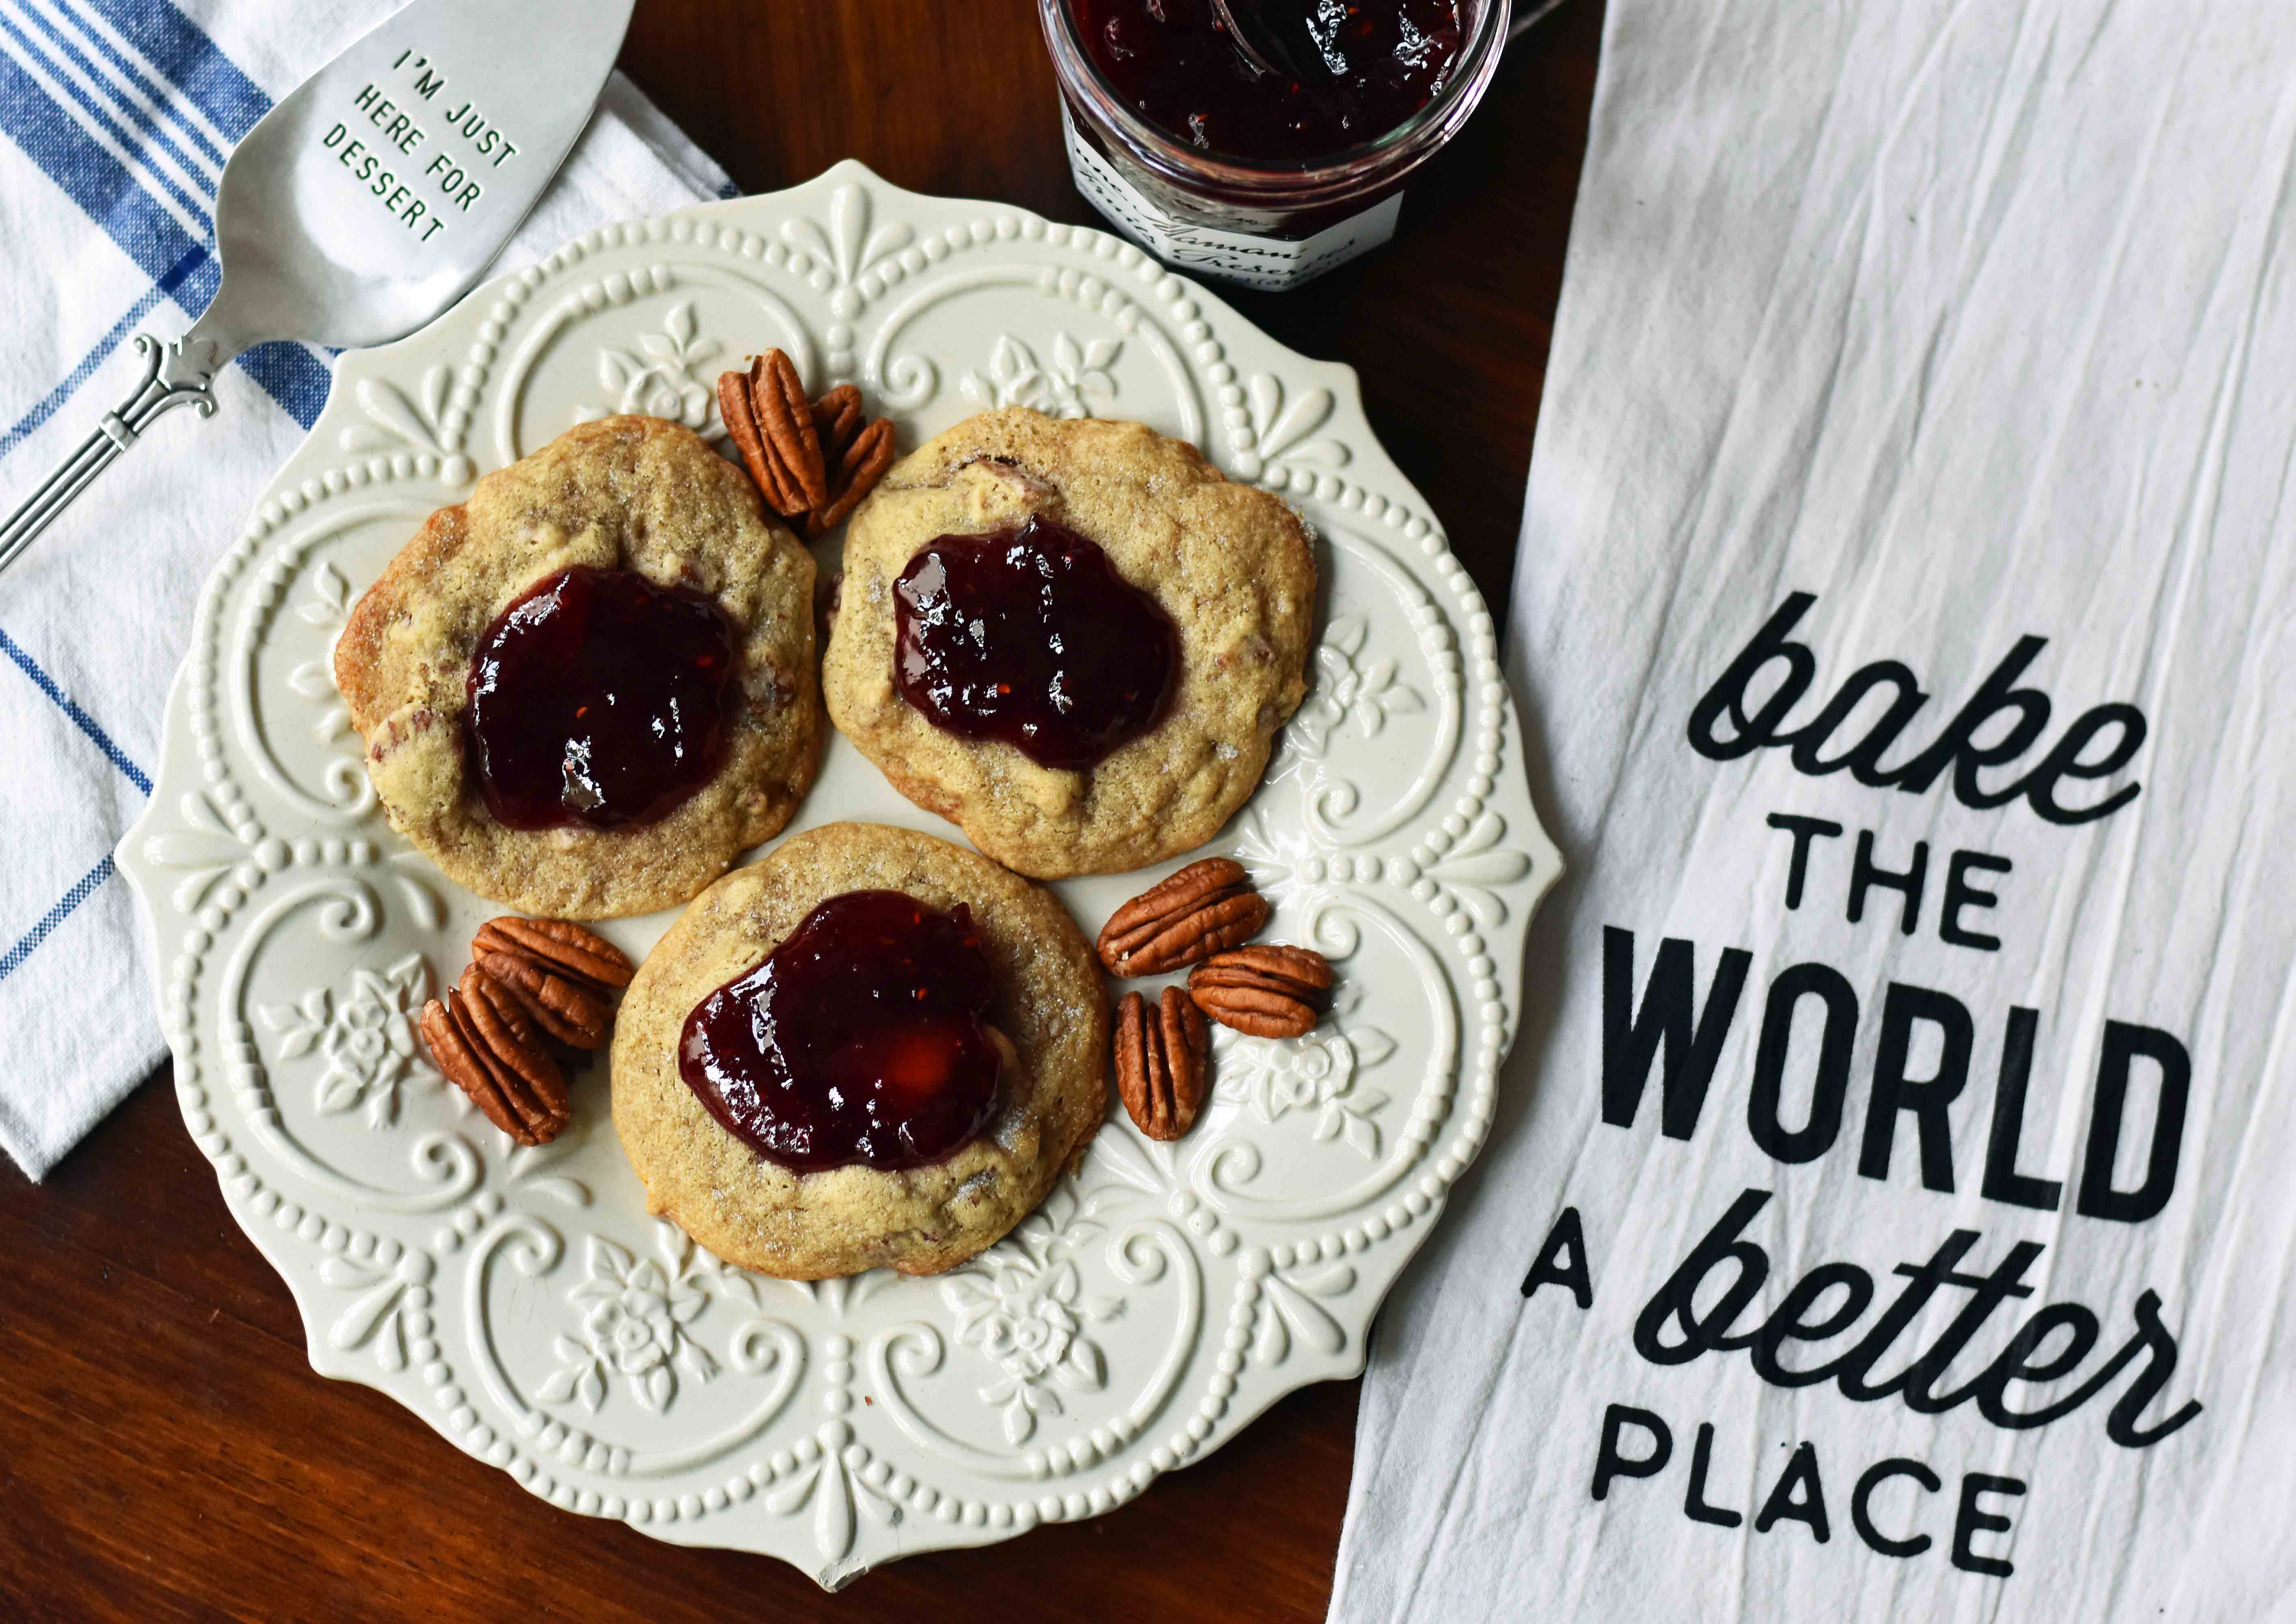 Cream Cheese Pecan Jam Thumbprint Cookies are a chewy pecan cookie baked until golden and topped with fresh berry jam. A soft and chewy cream cheese pecan cookie topped with fresh jam. www.modernhoney.com